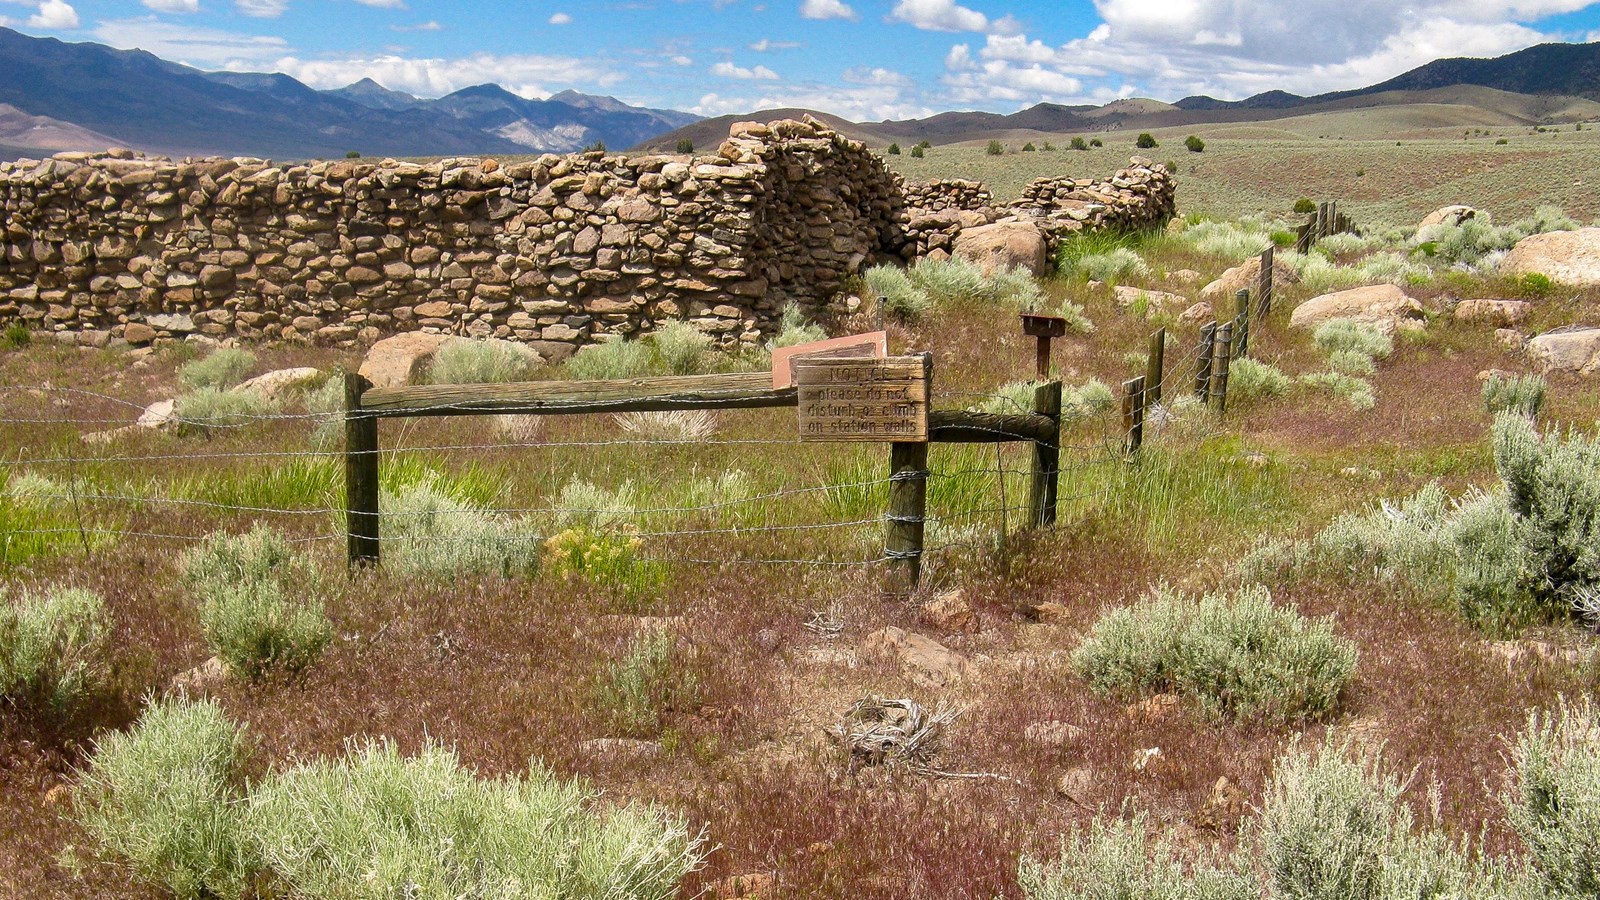 Standing stacked rock wall ruins of a building in a natural setting of sagebrush and mountains.